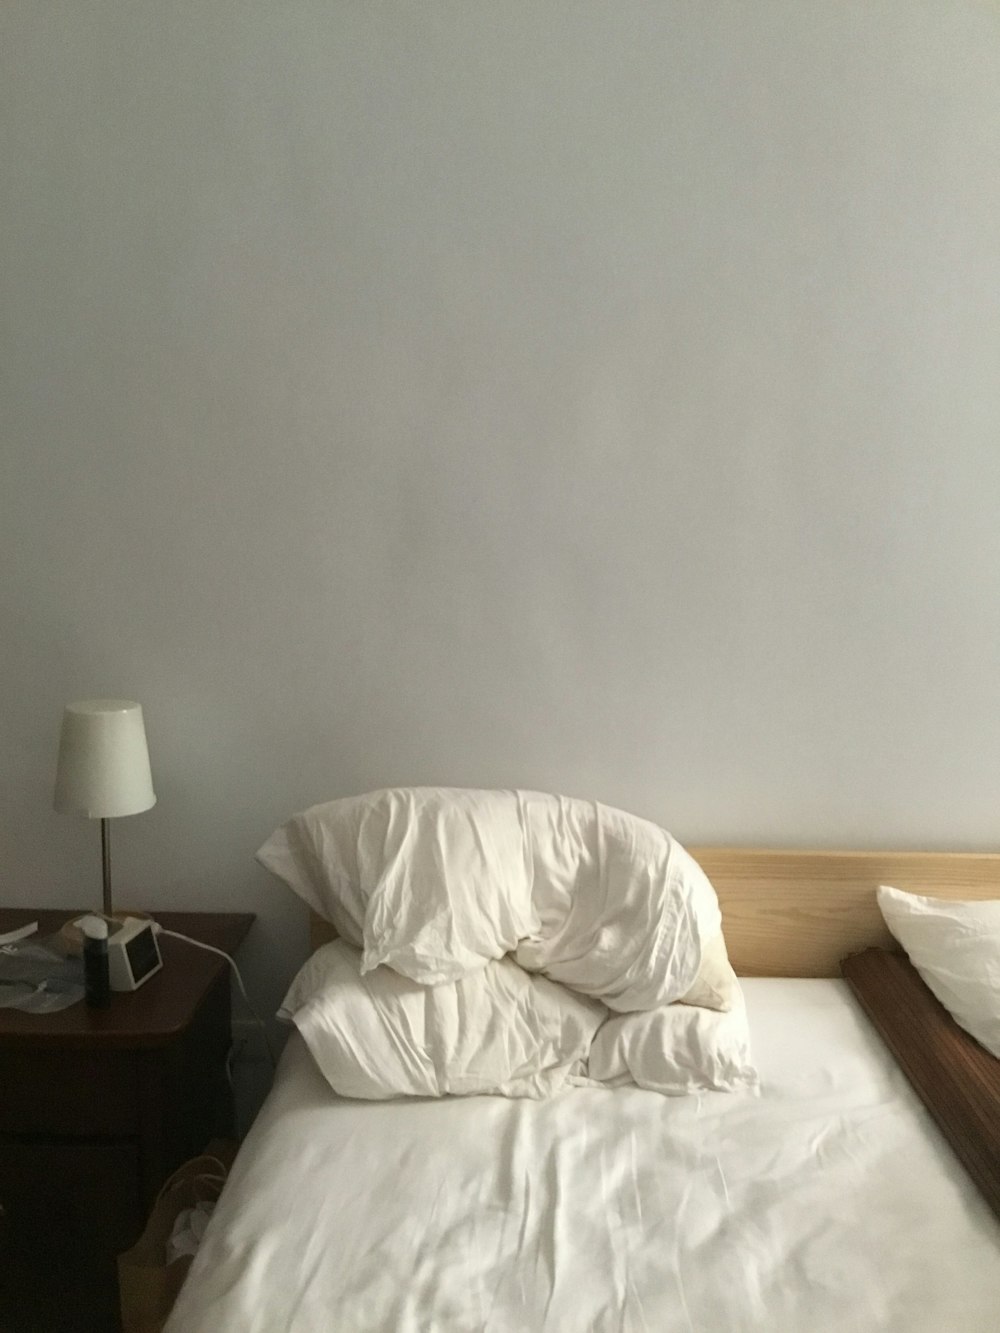 white bed linen near brown wooden table